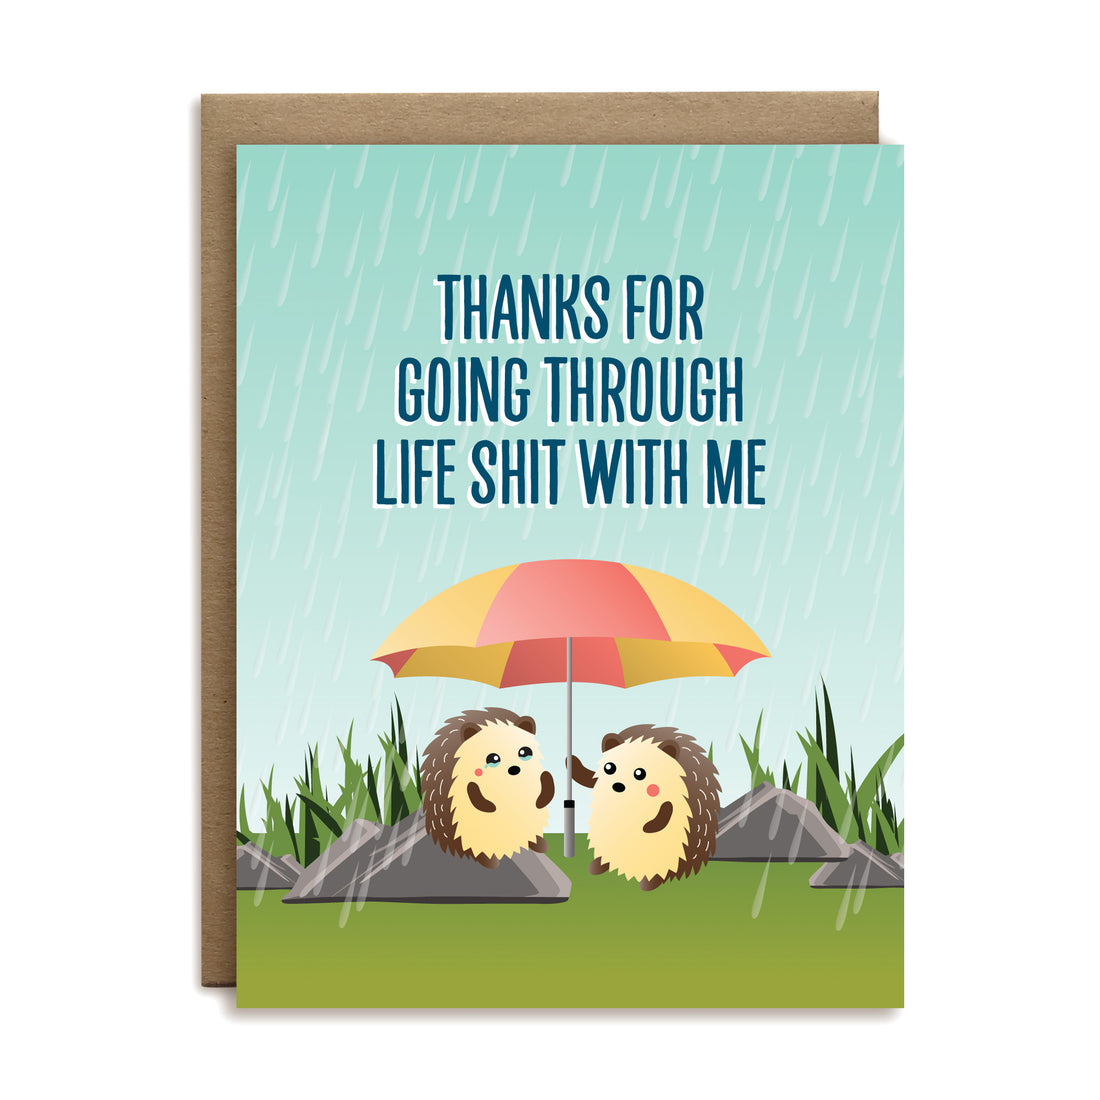 Thanks for going through life shit with me friendship greeting card by I&